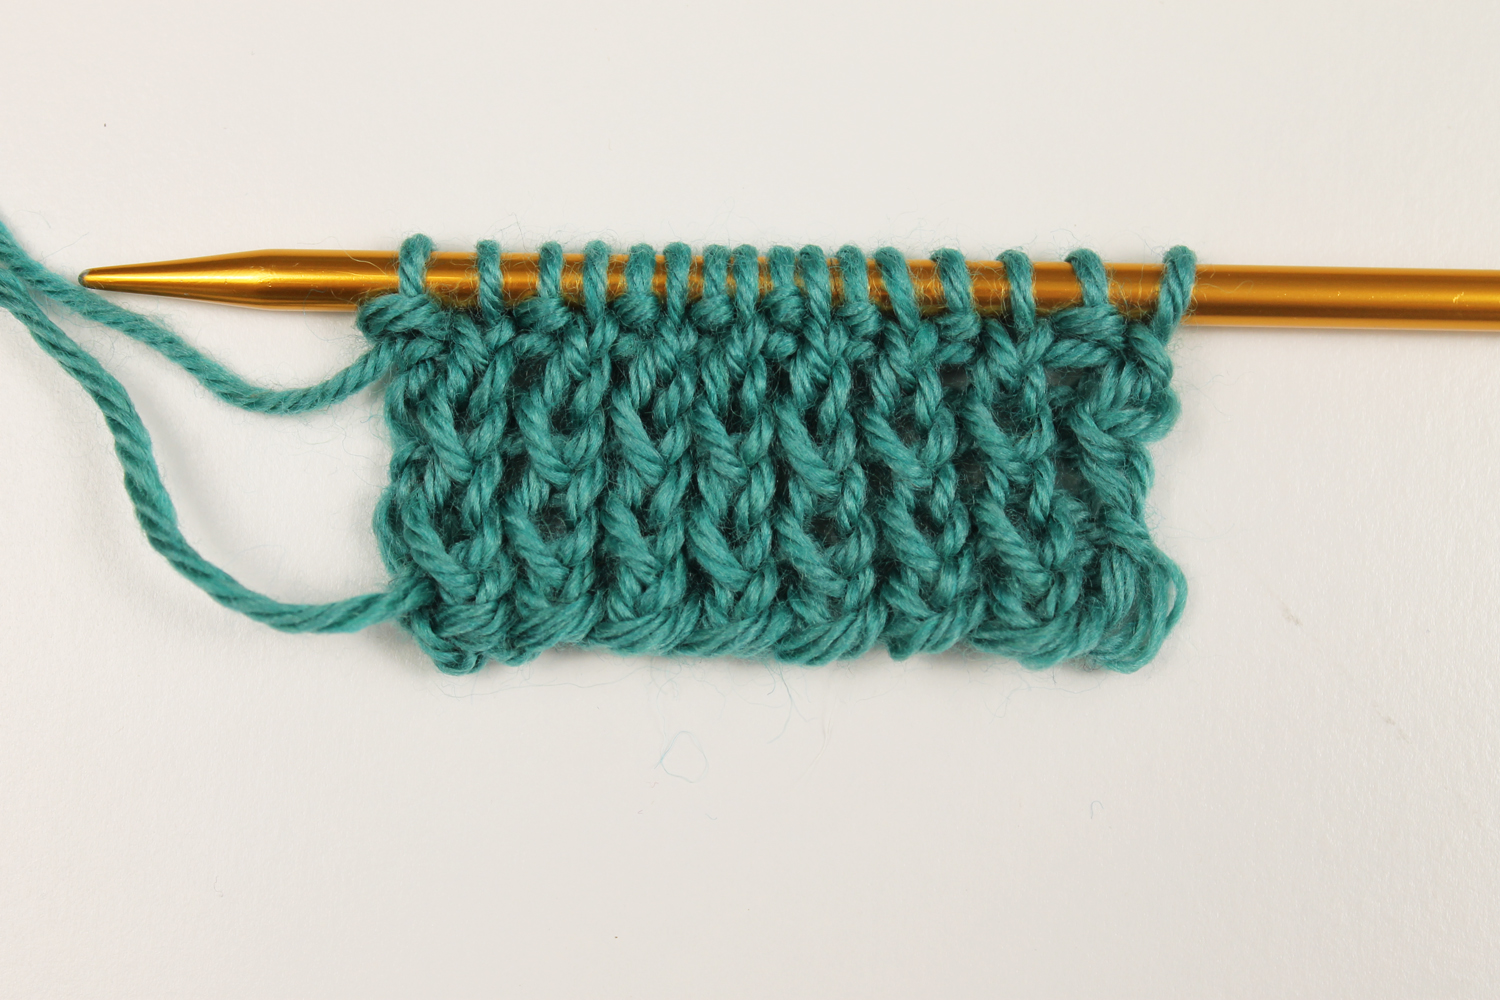 Twisted Rib Knitting Tutorial: How to Knit Twisted Ribbing